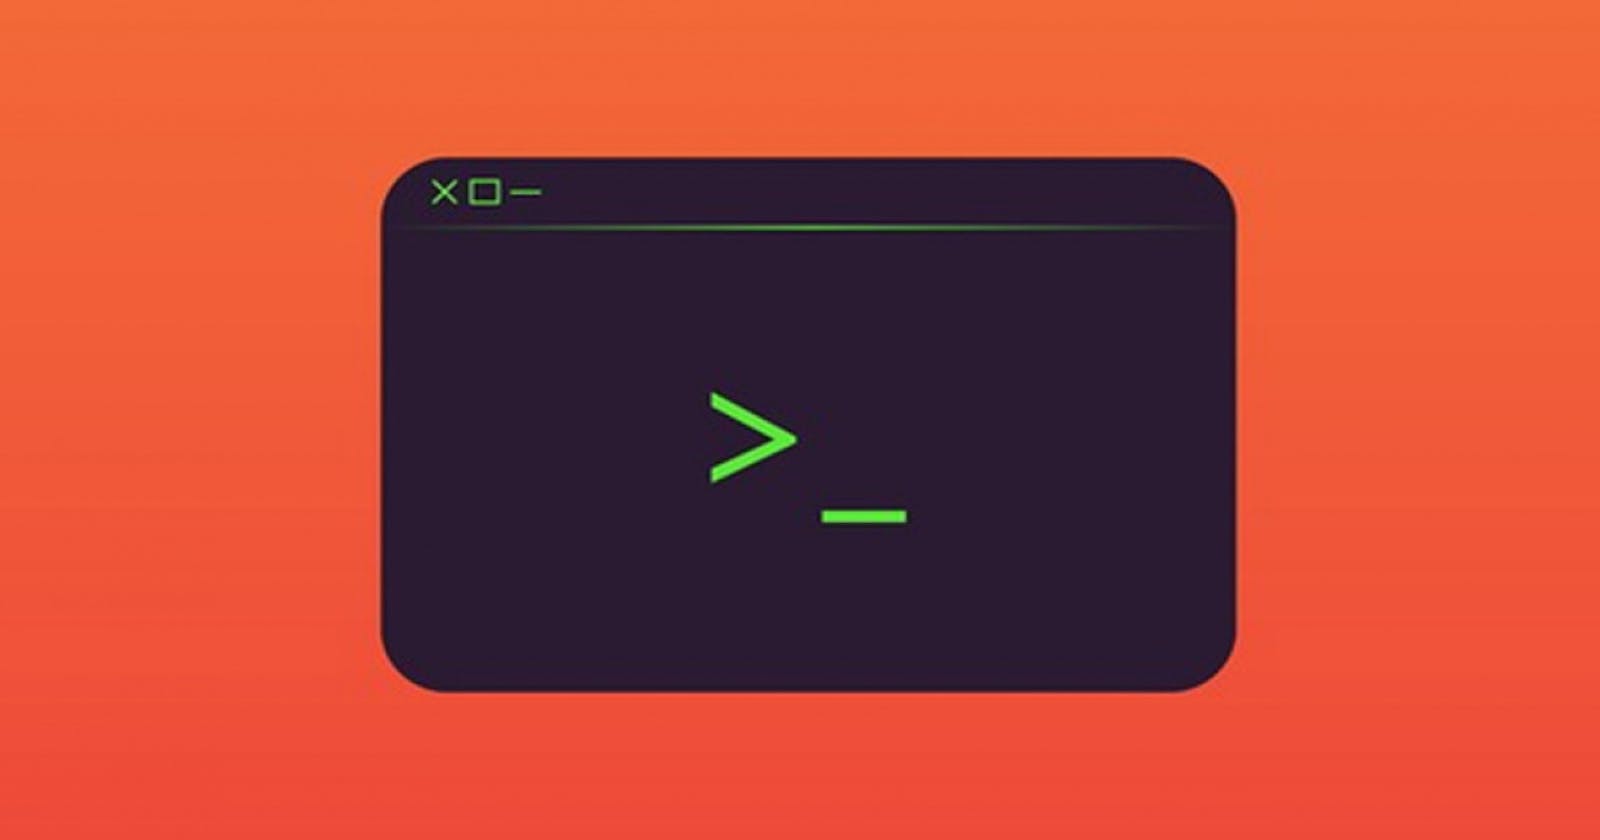 How To Build CLI App In Rust Using Clap - Part 2